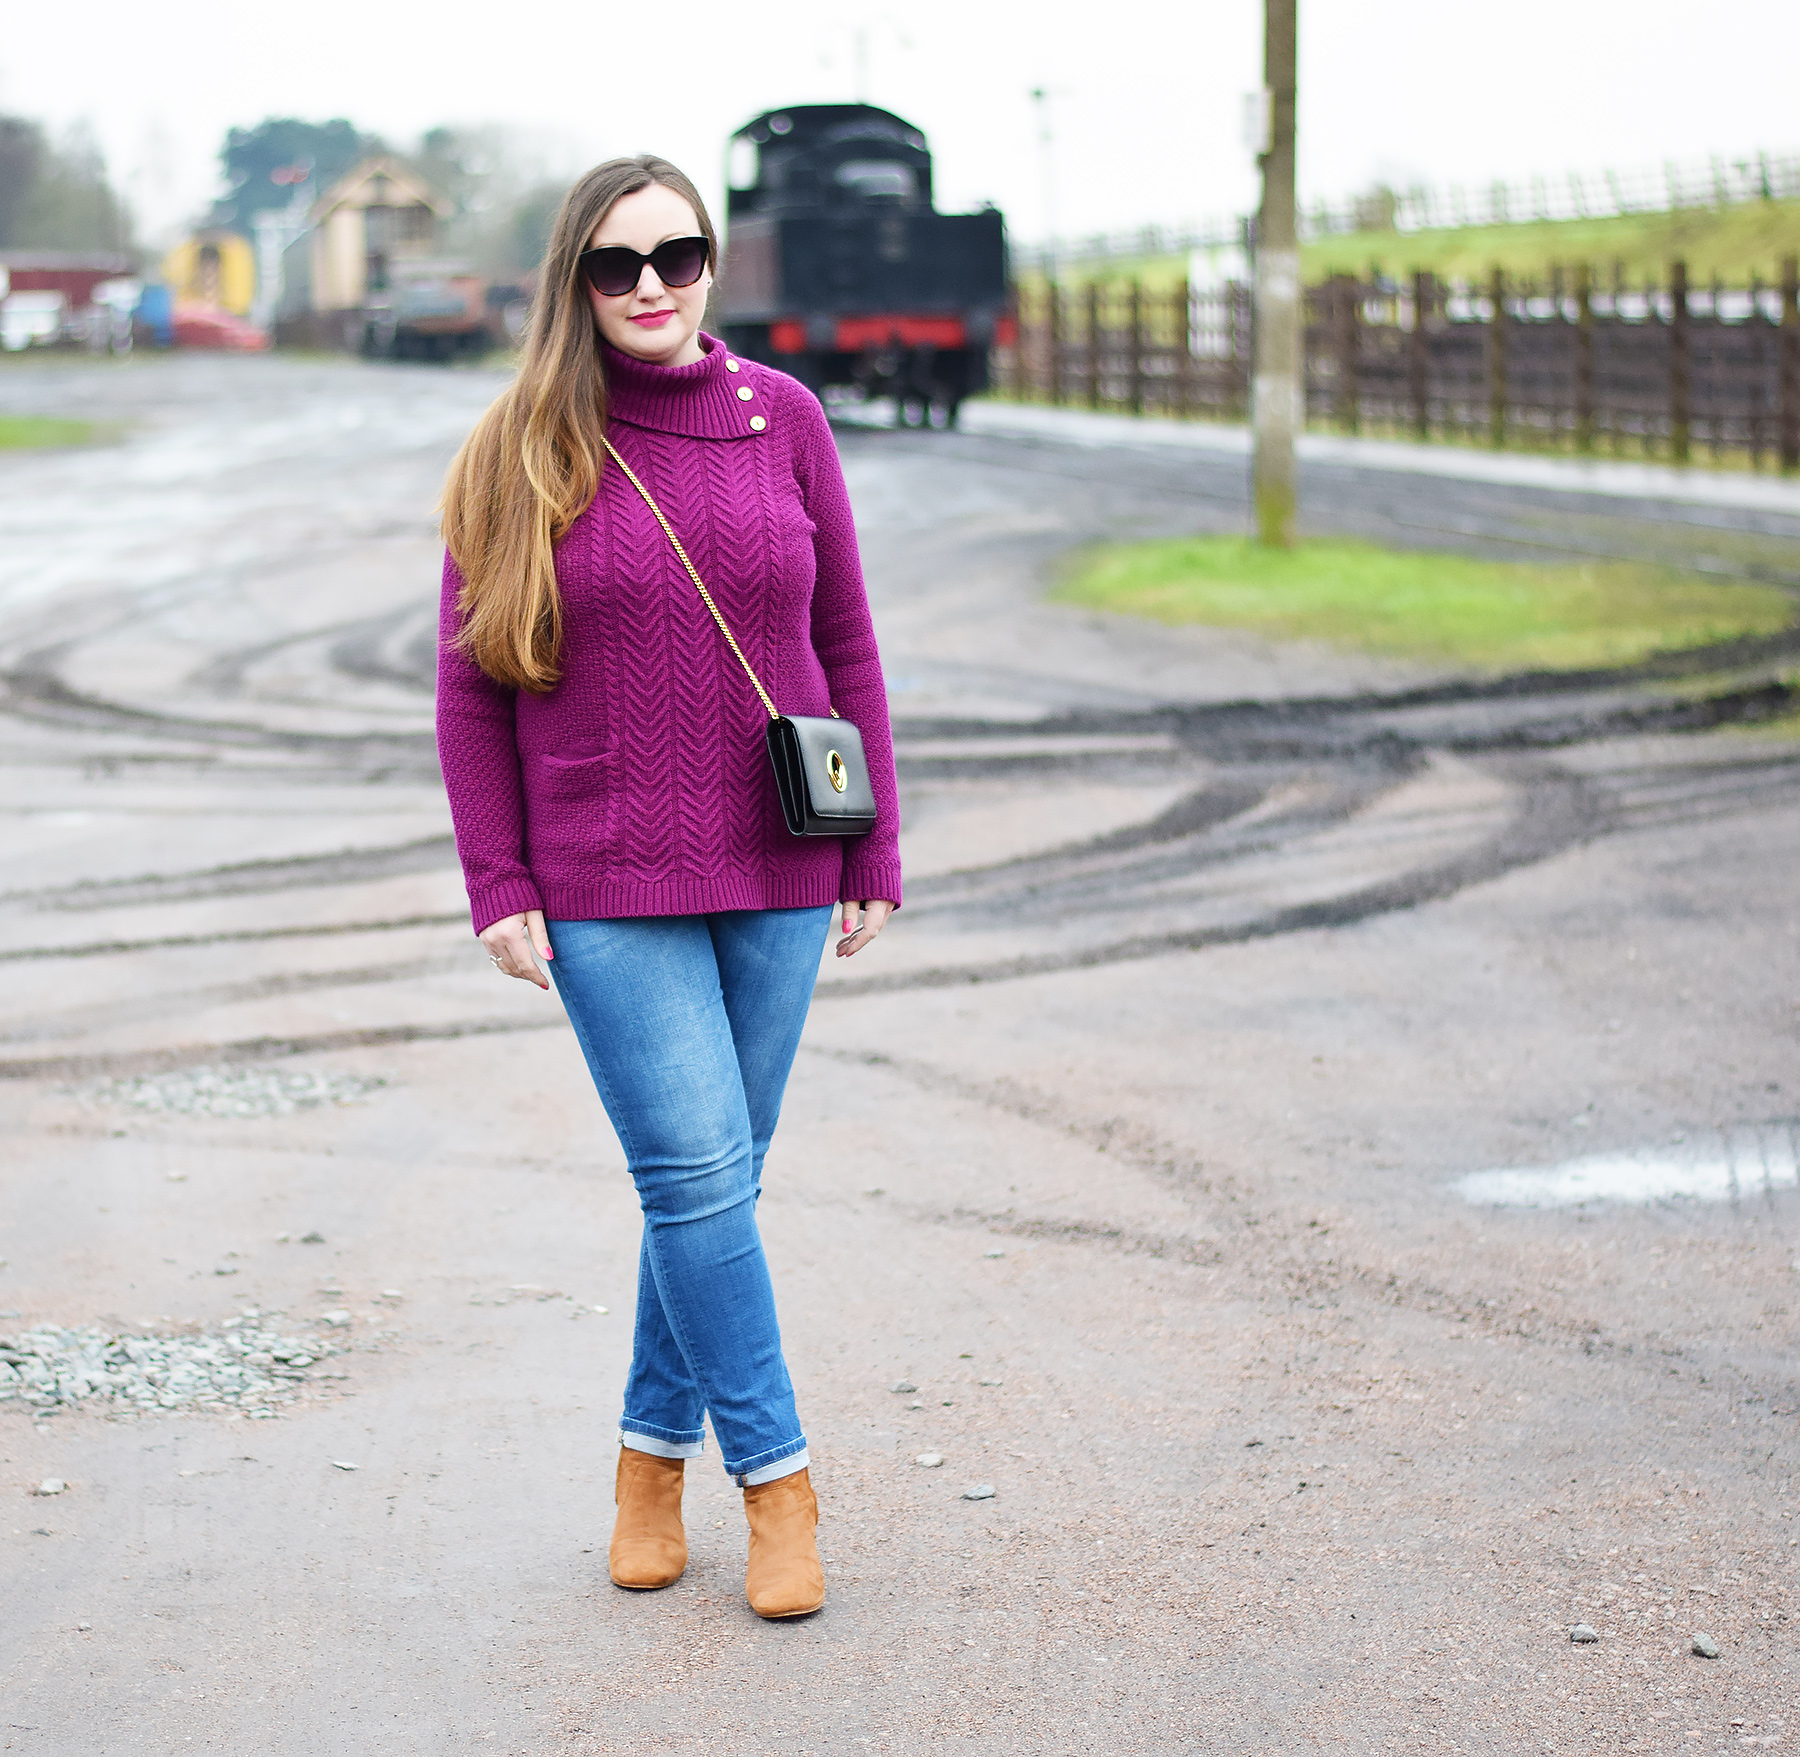 Purple jumper outfit